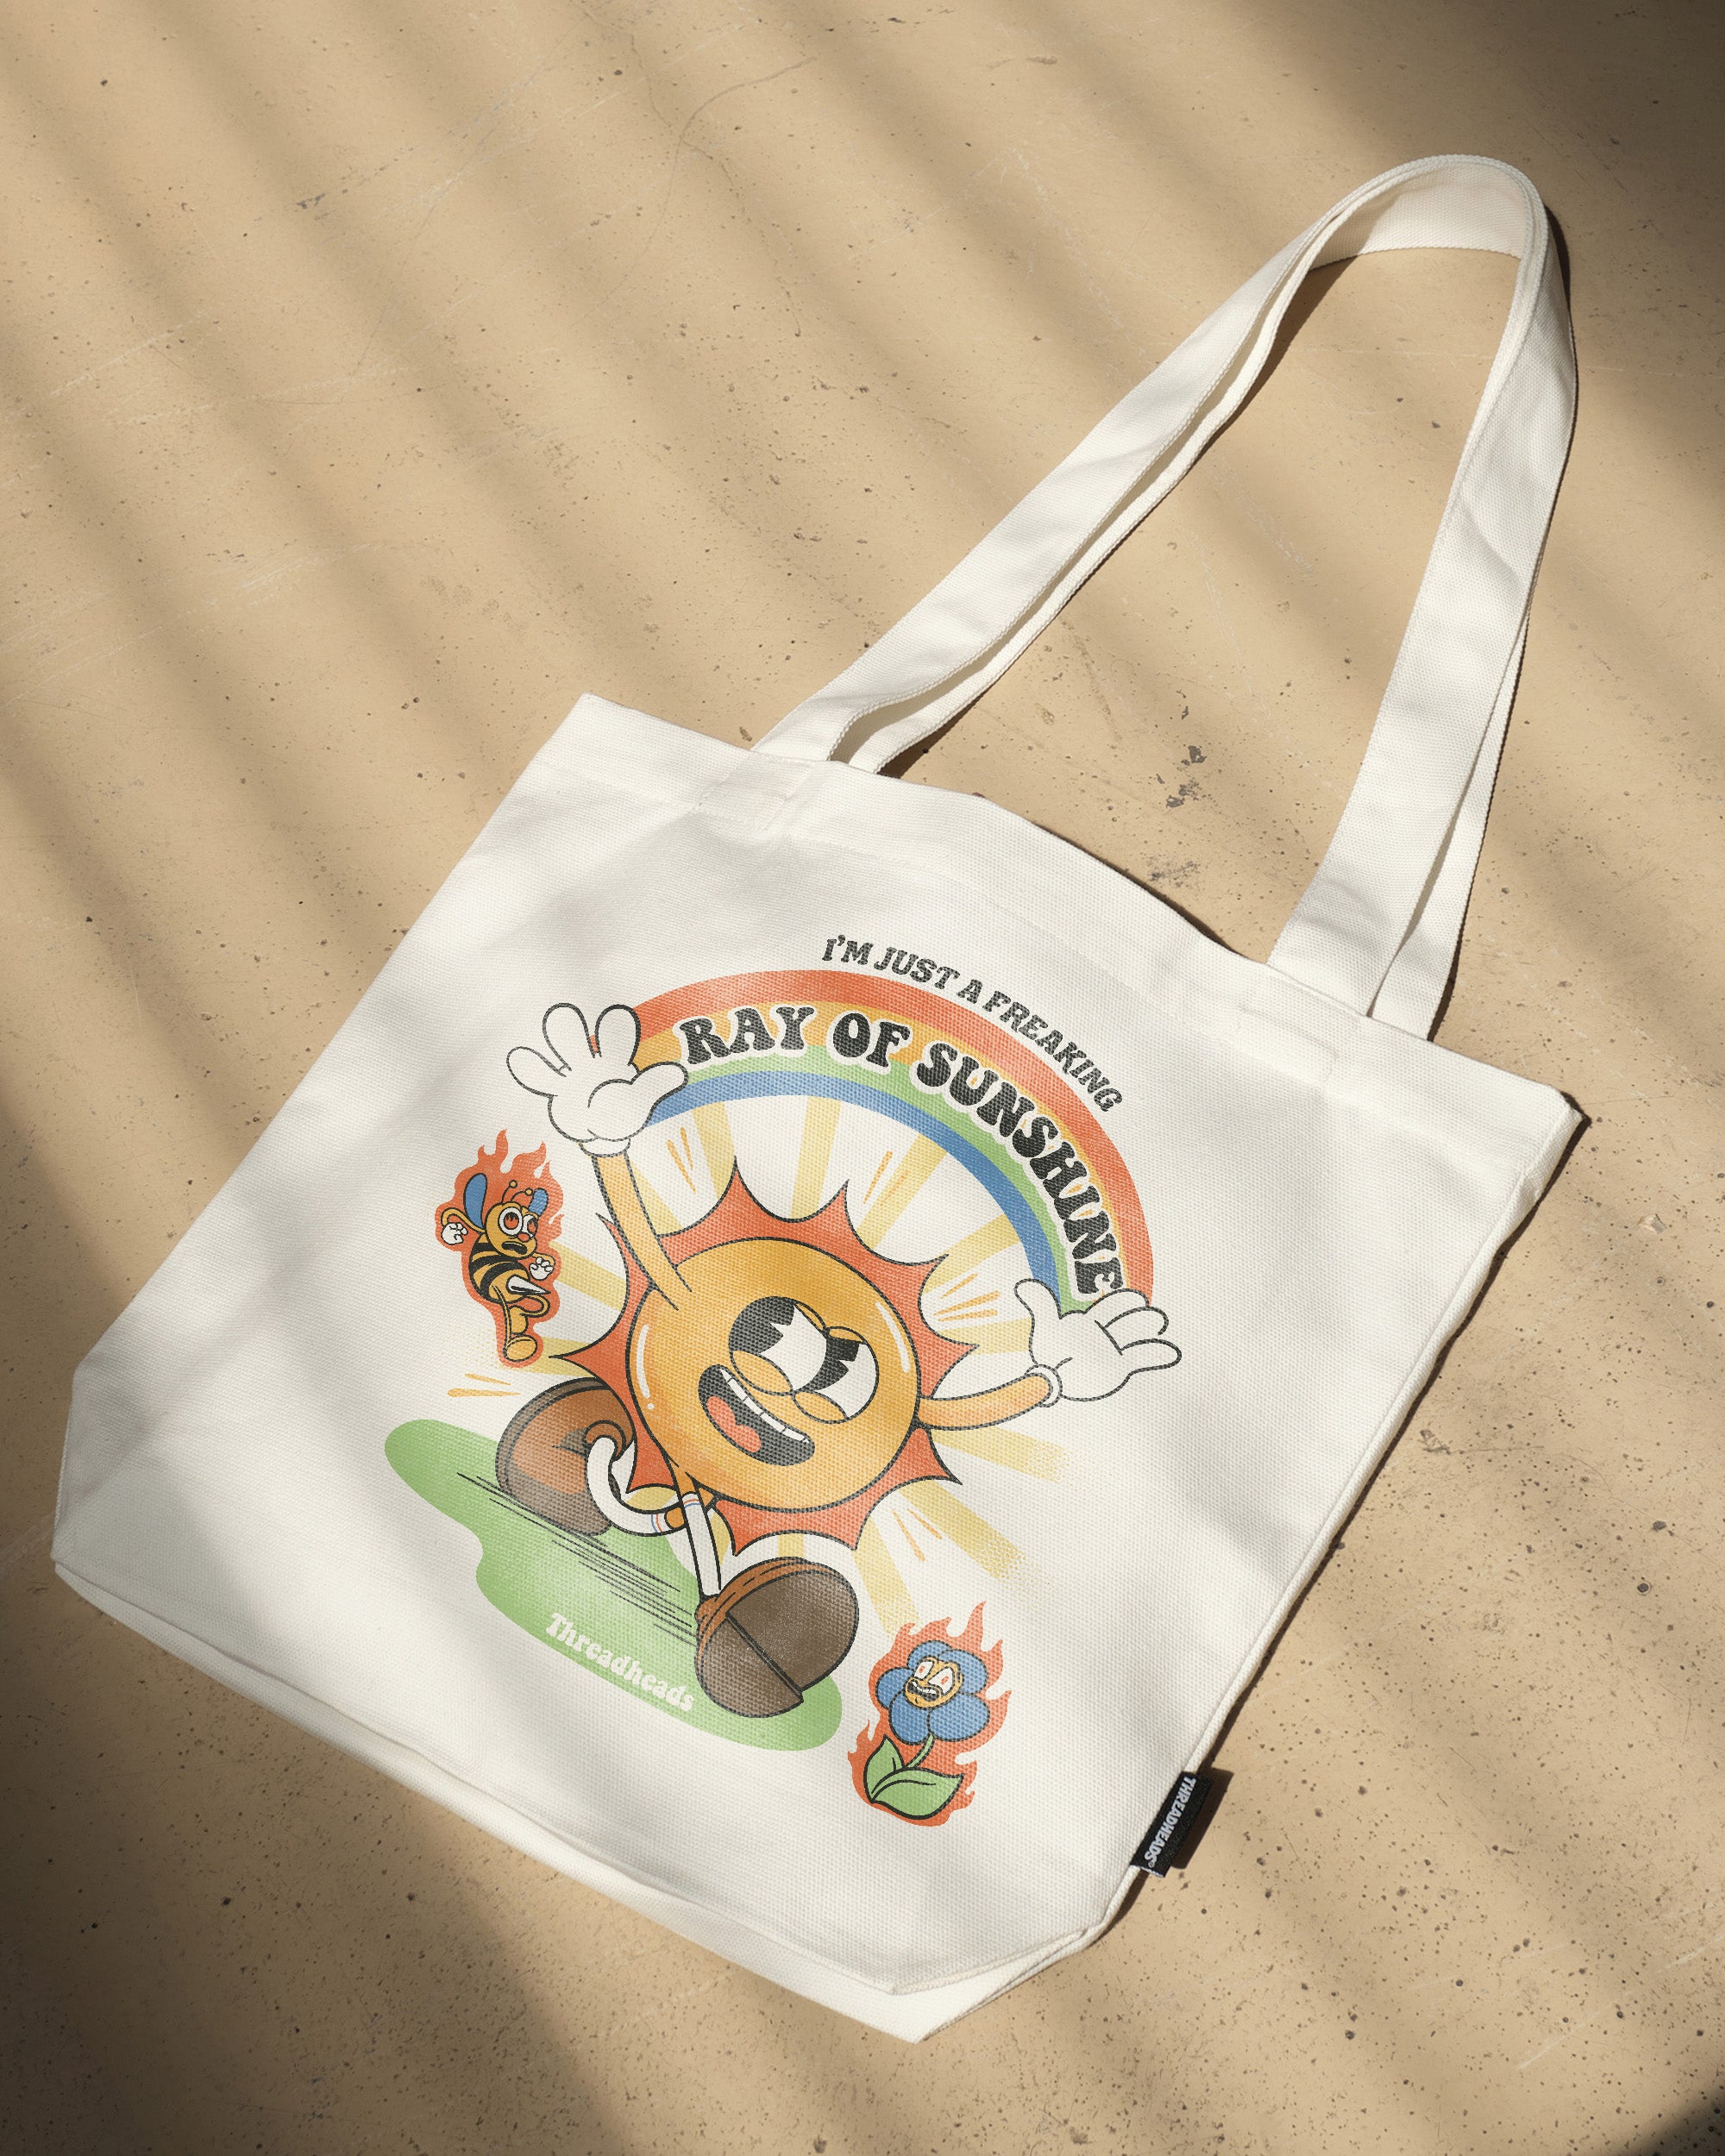 I'm Just a Freaking Ray Of Sunshine Tote Bag